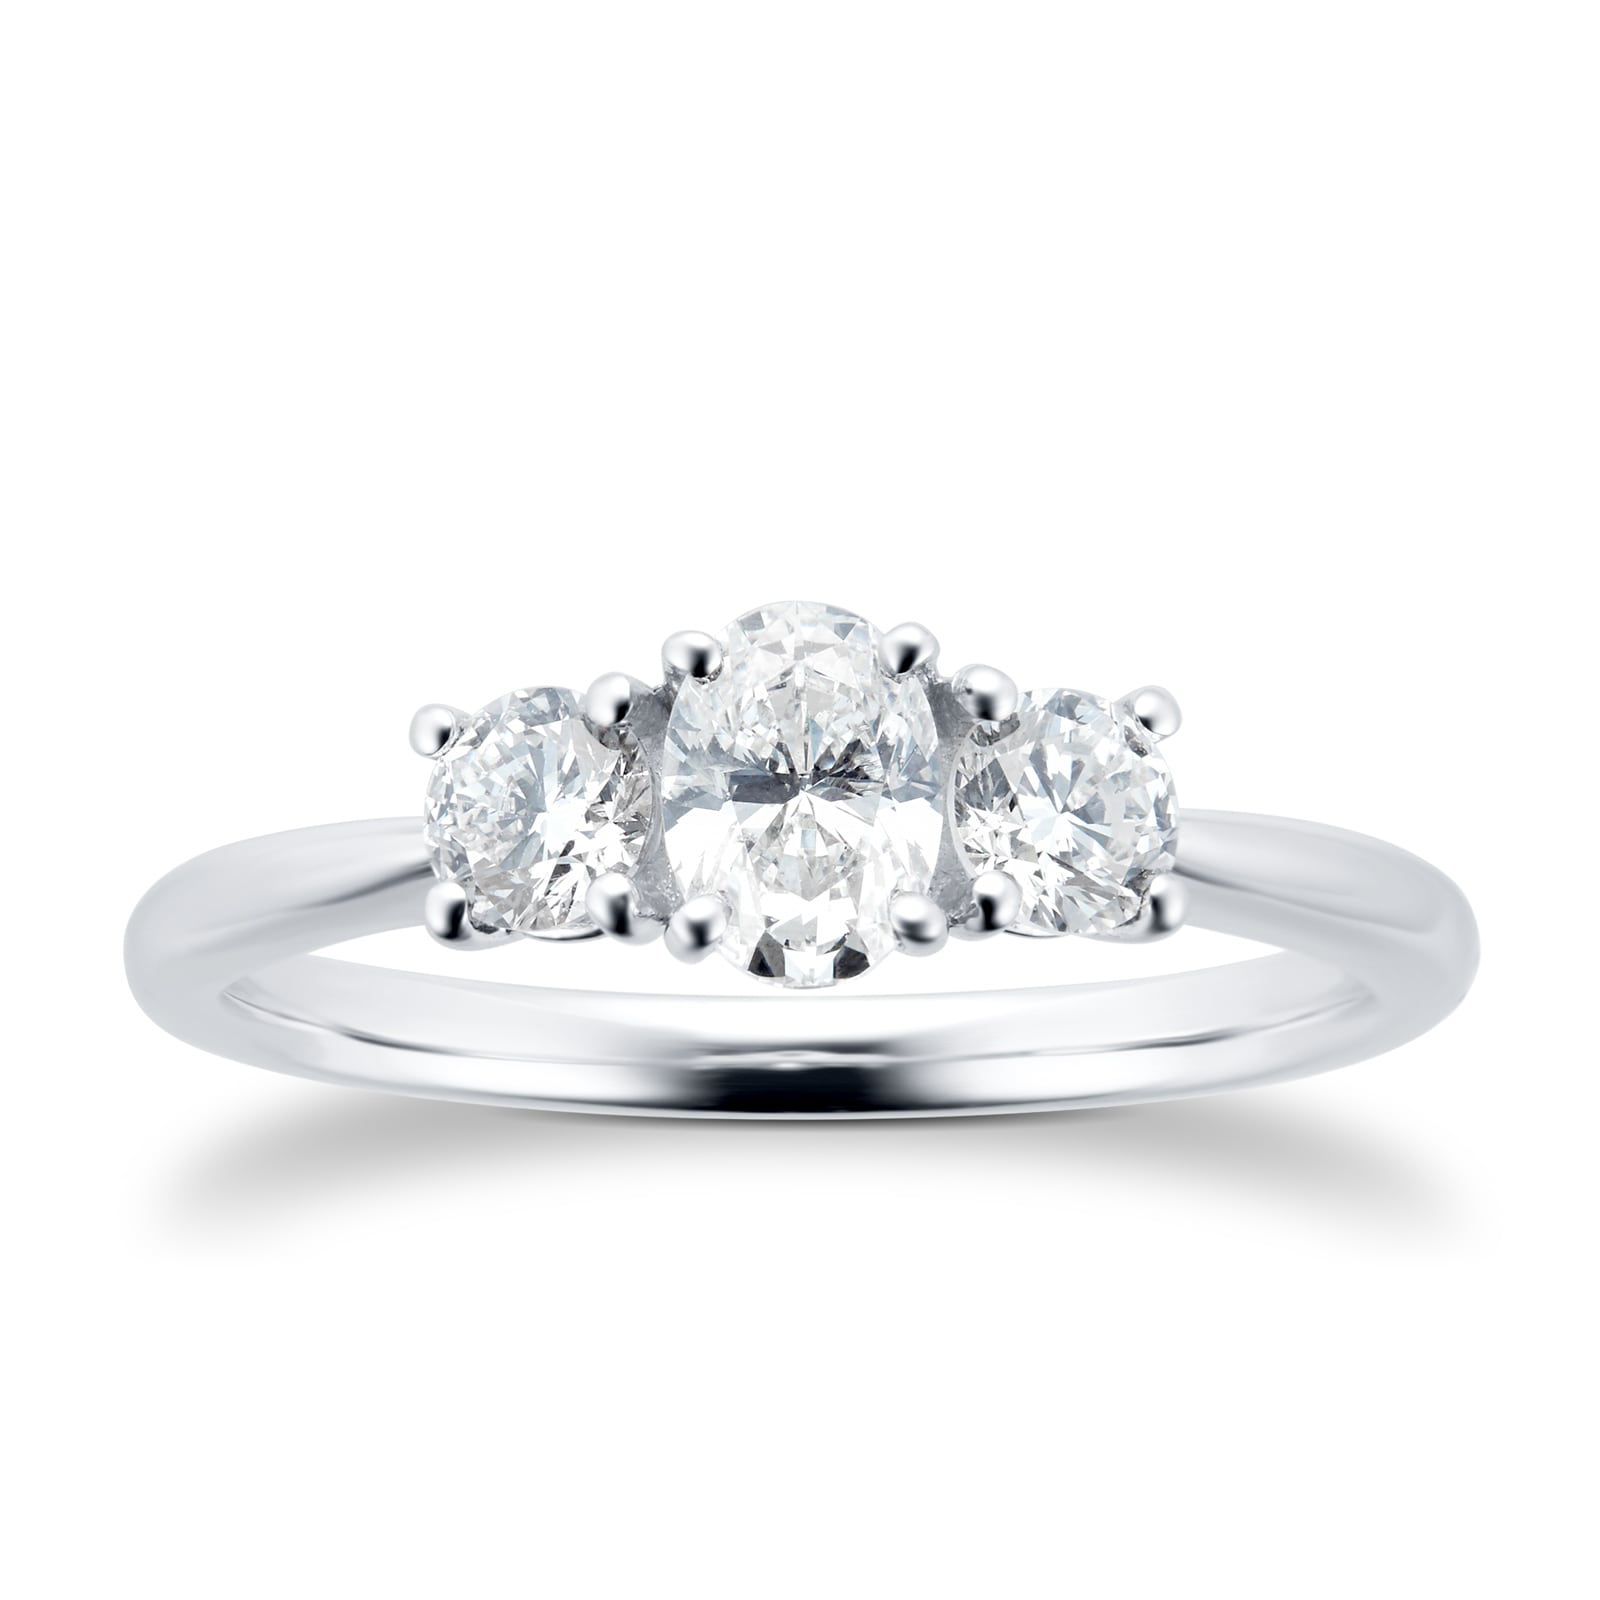 Platinum 0.76cttw Diamond Thee Stone Oval & Brilliant Cut Engagement Ring - Ring Size P